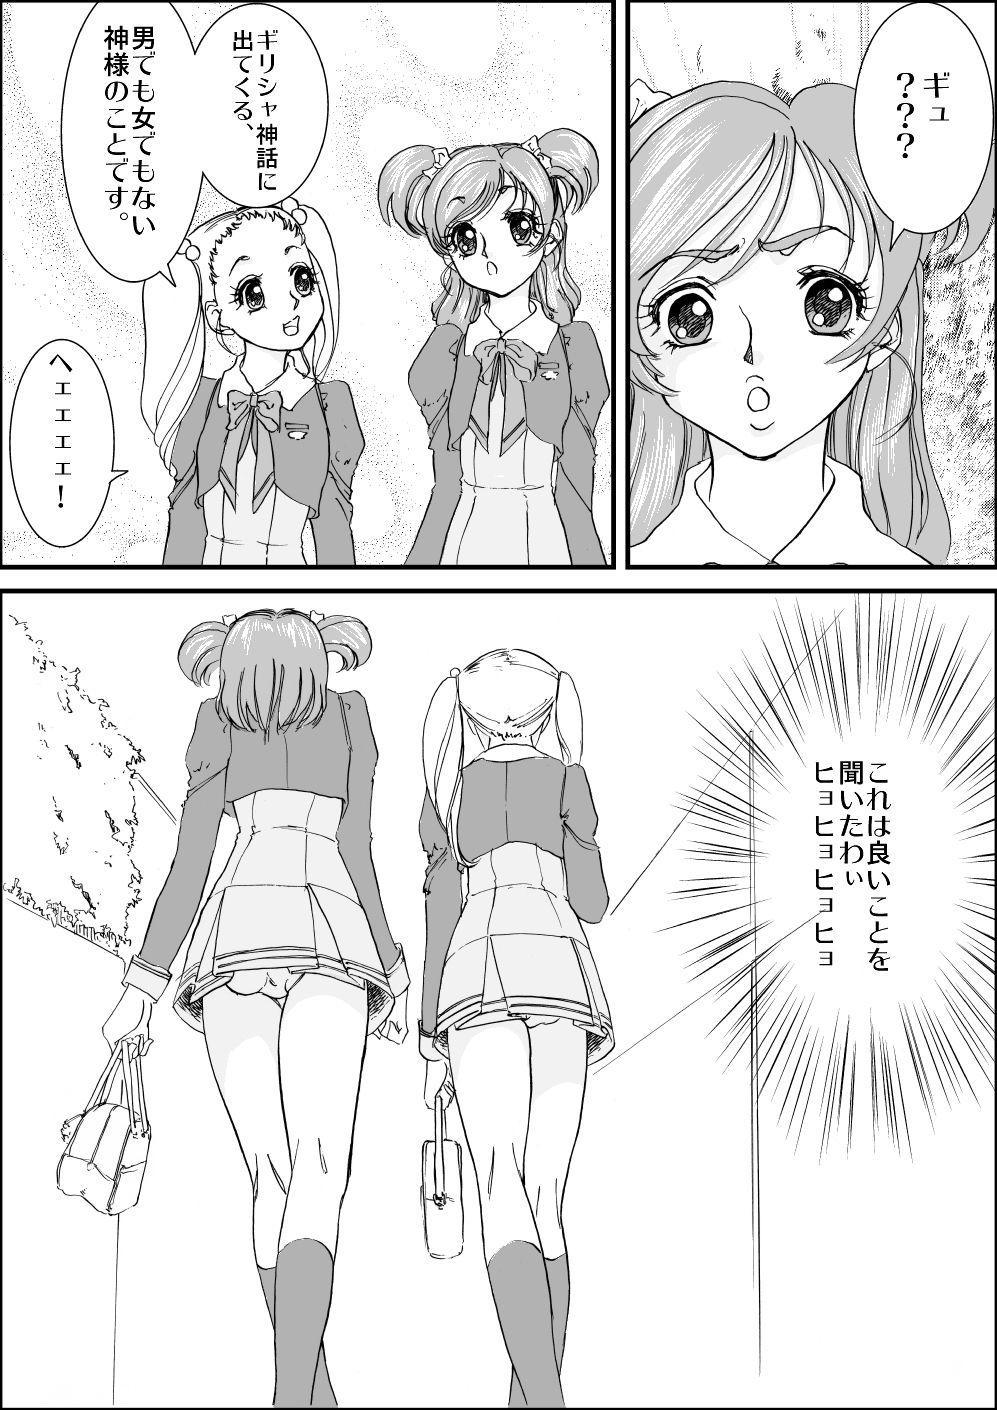 Sex Toys Kinoko no ie ni Goyoushin - Pretty cure Yes precure 5 Smooth - Page 2